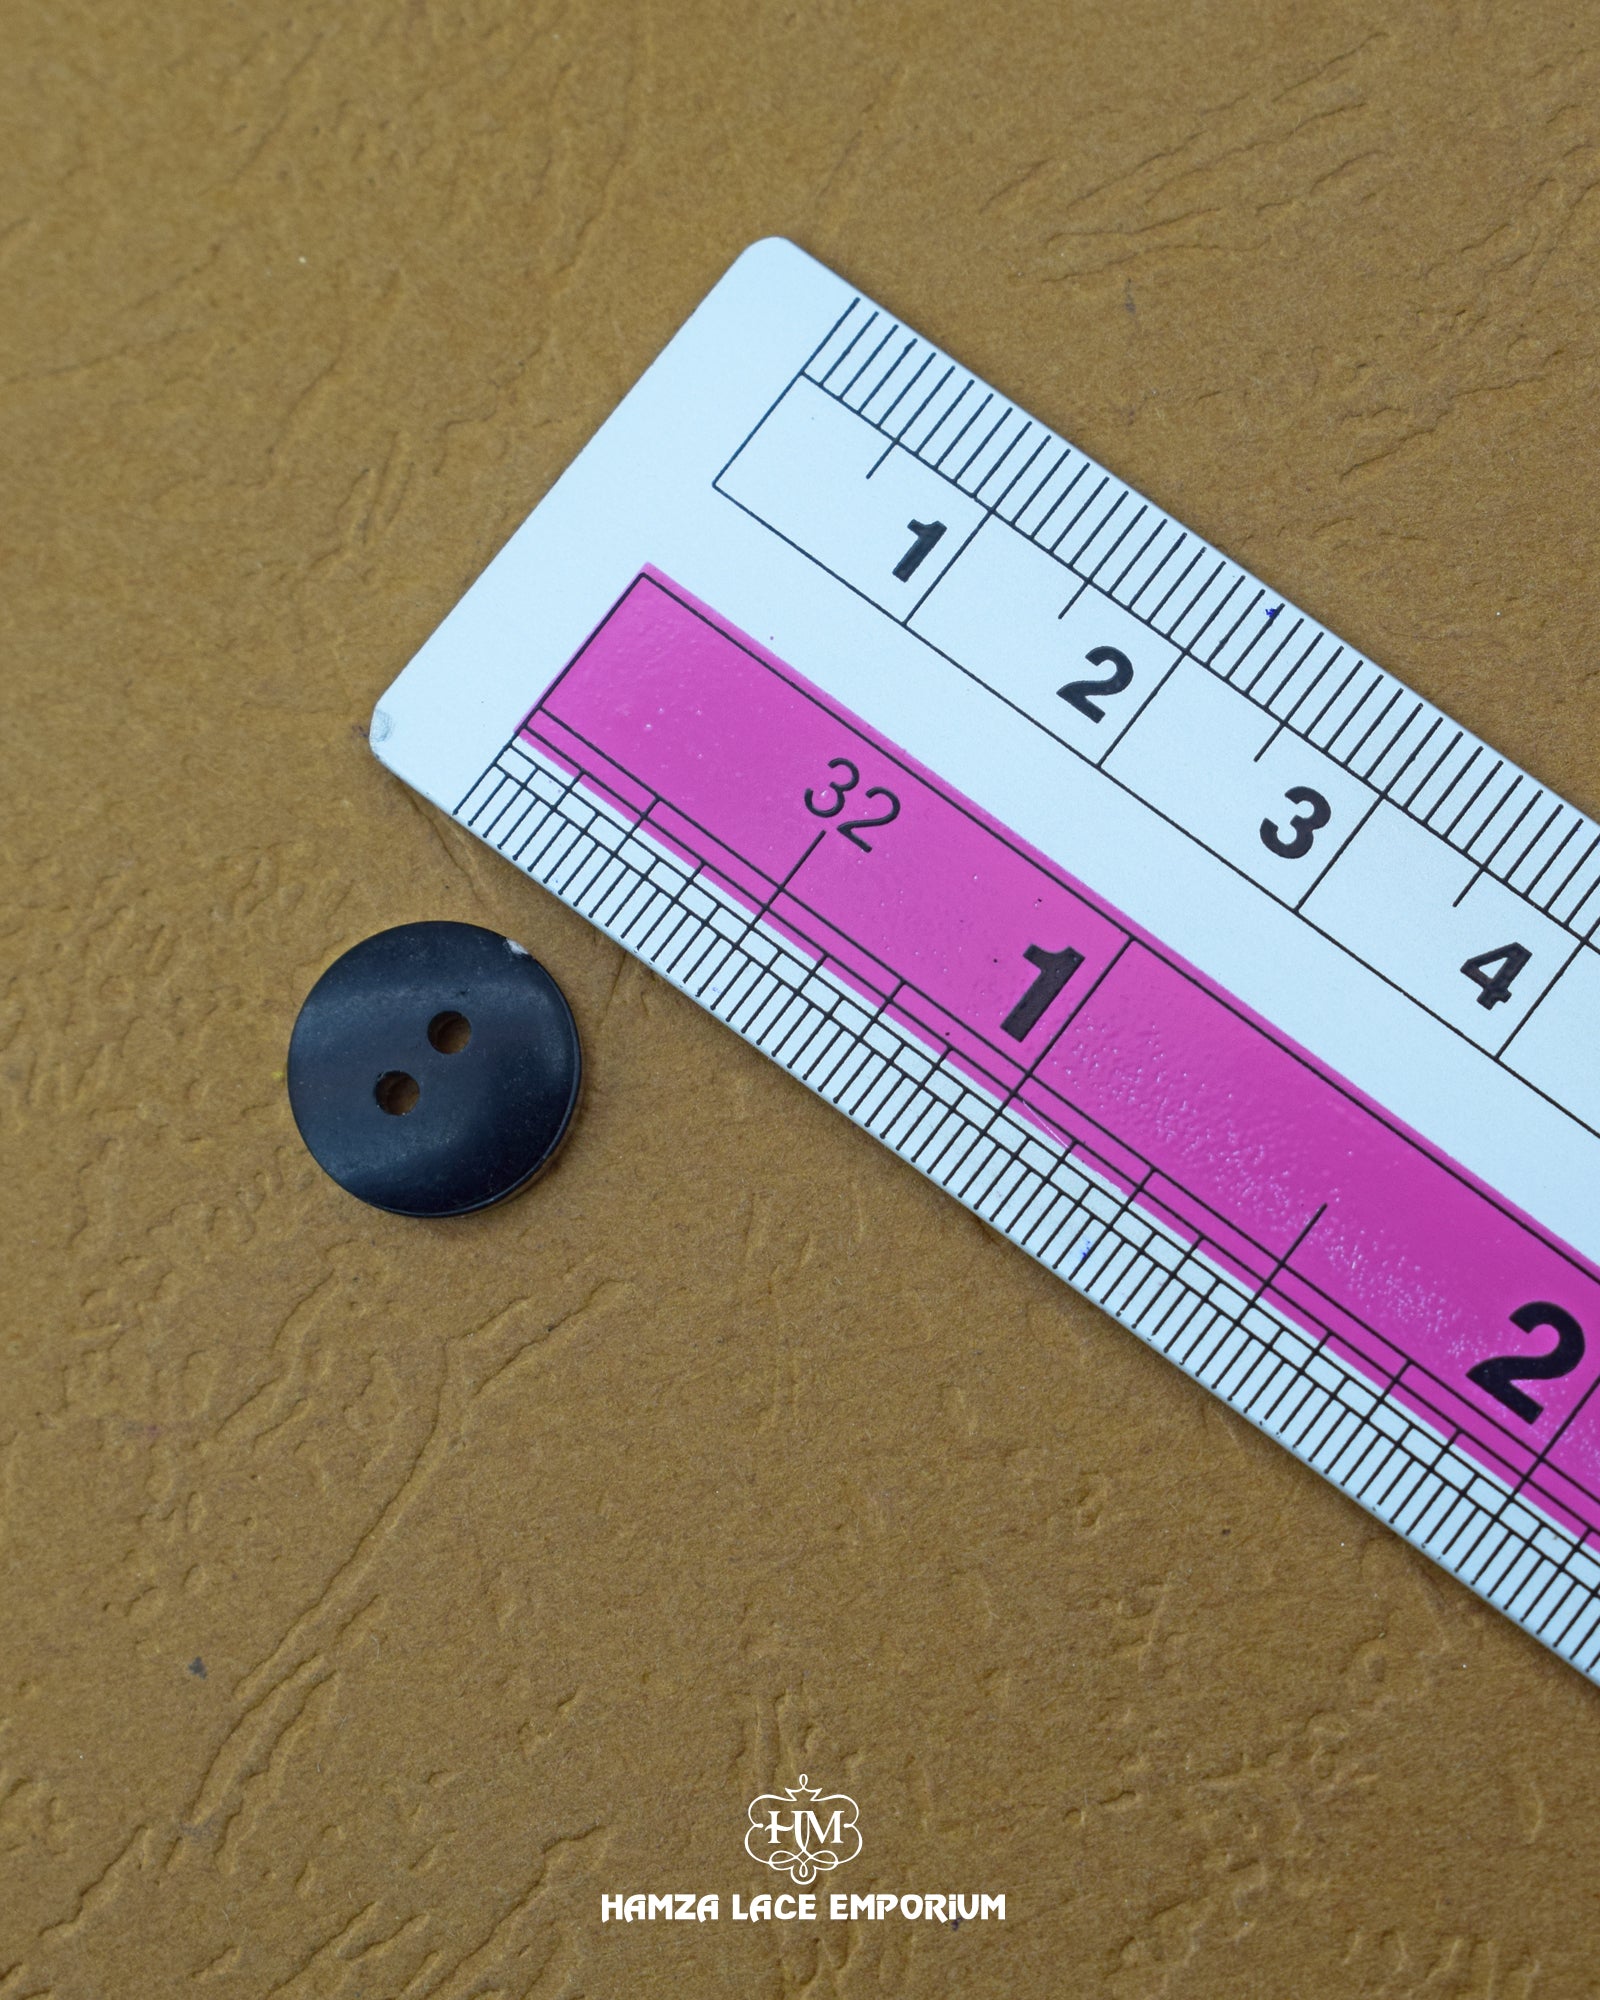 The dimensions of the 'Star Design Plastic Button MB837' are determined using a ruler.